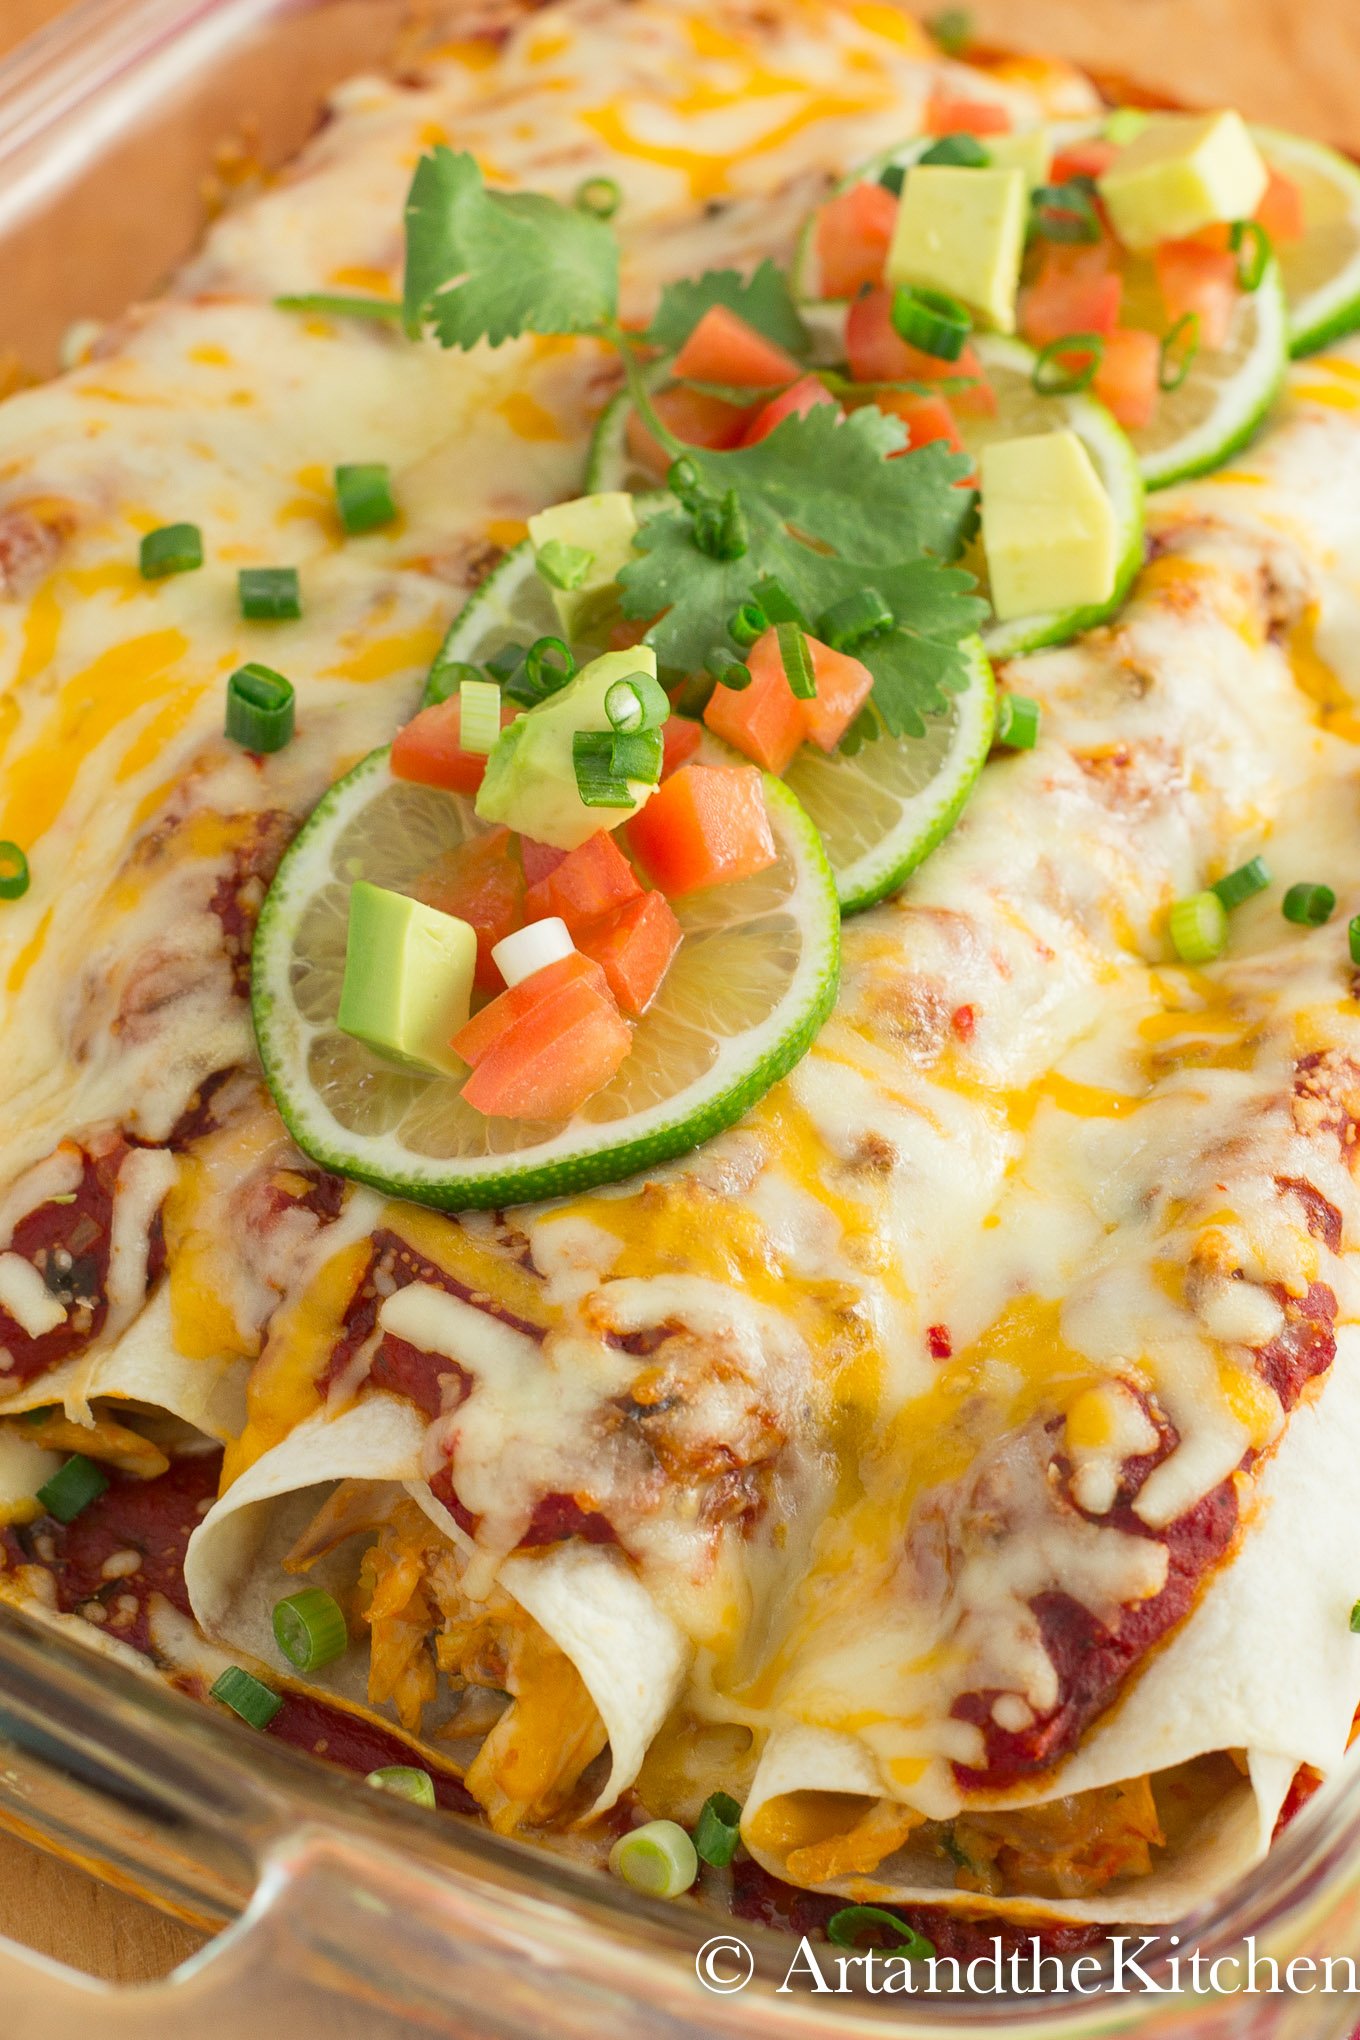 Enchilada made with chicken and covered with sauce and melted cheese.